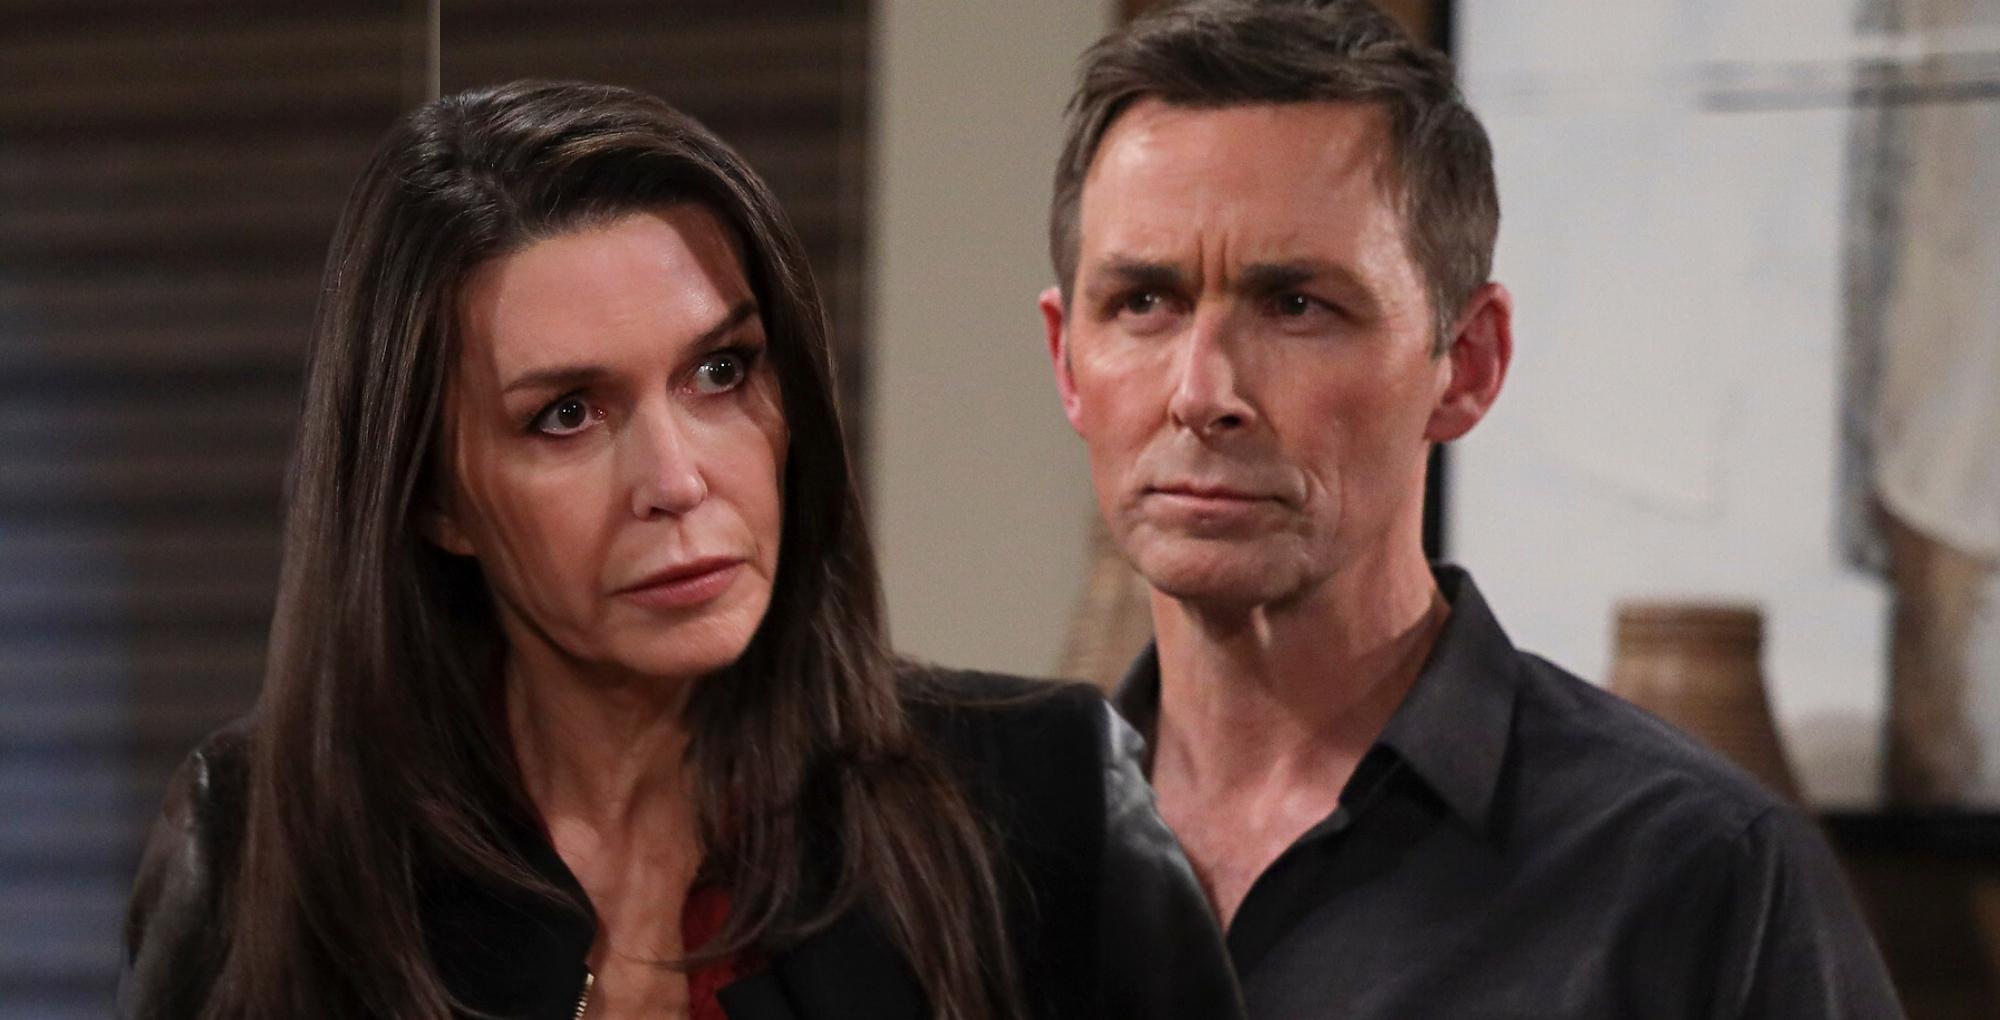 general hospital supposedly killed off anna devane and valentin but no one on gh cares